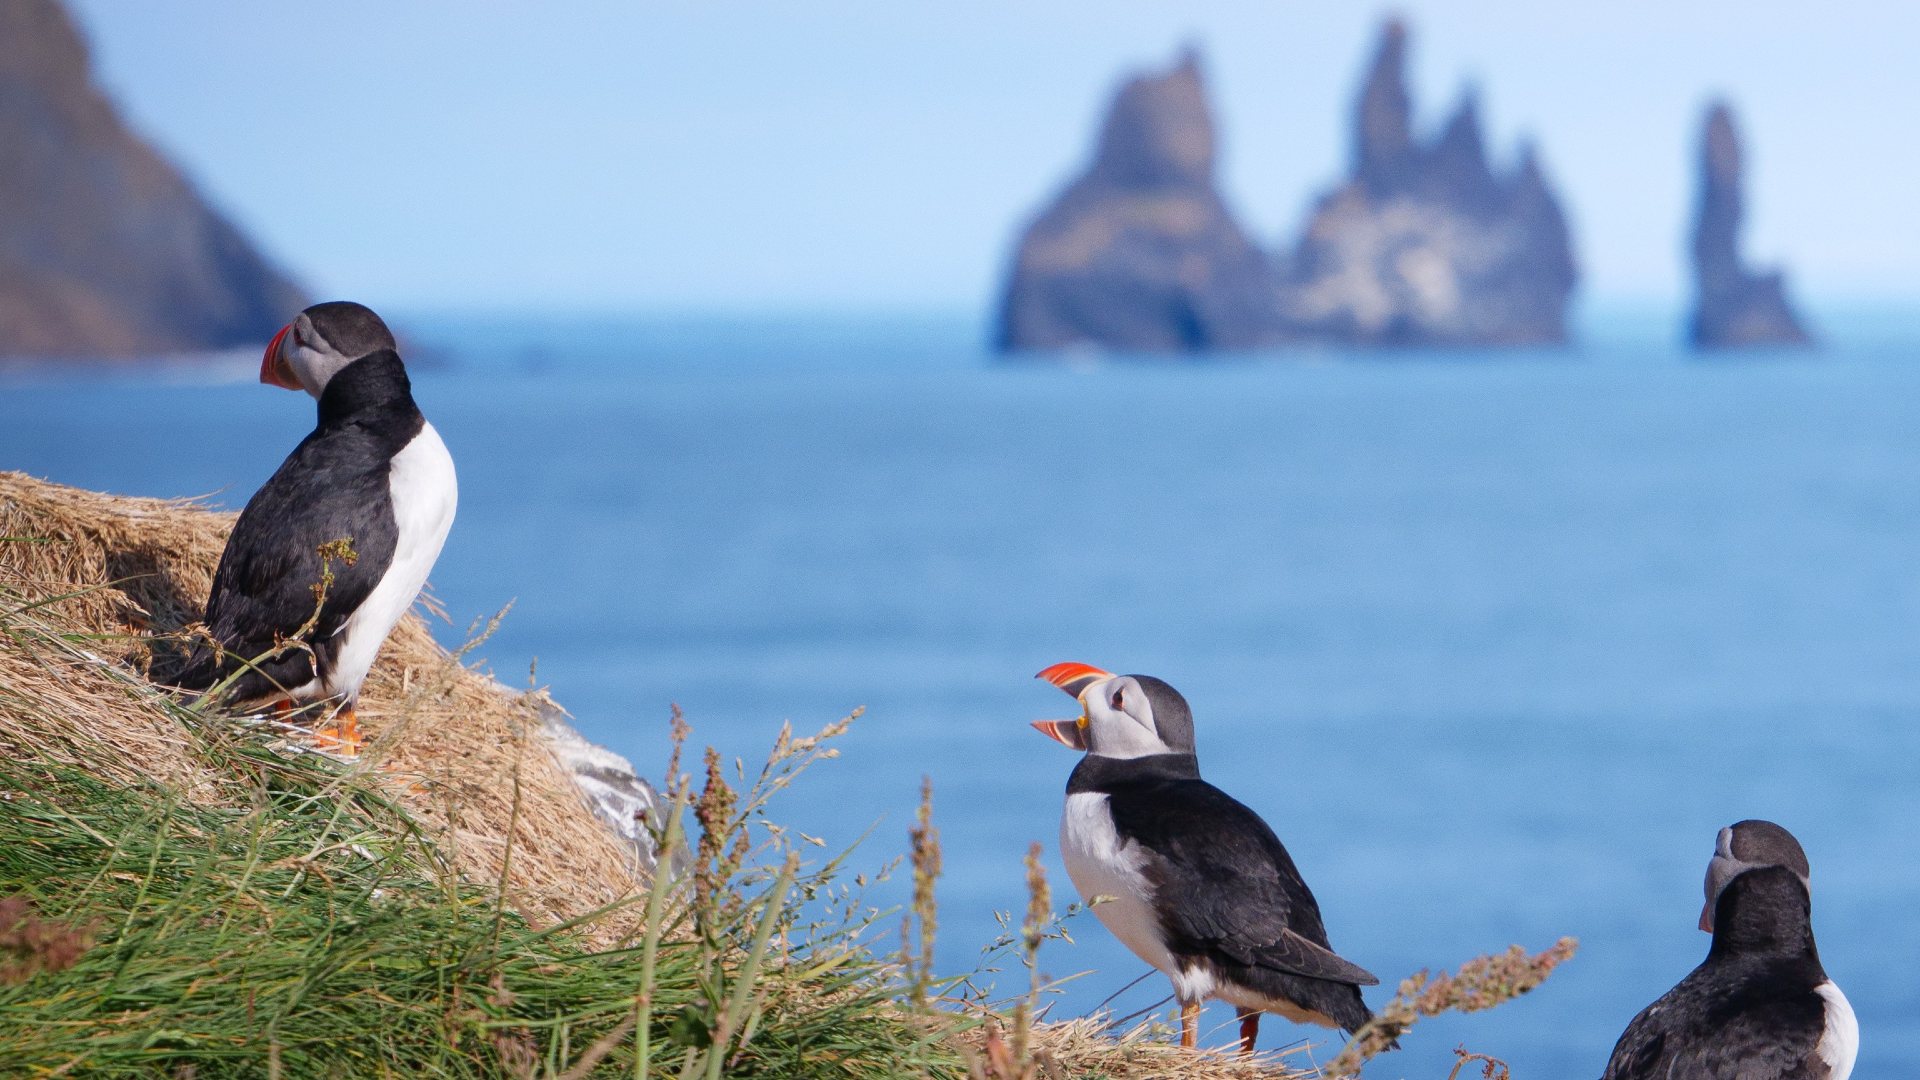 Atlantic puffins with the Reynisdrangar sea stacks in the background, Iceland